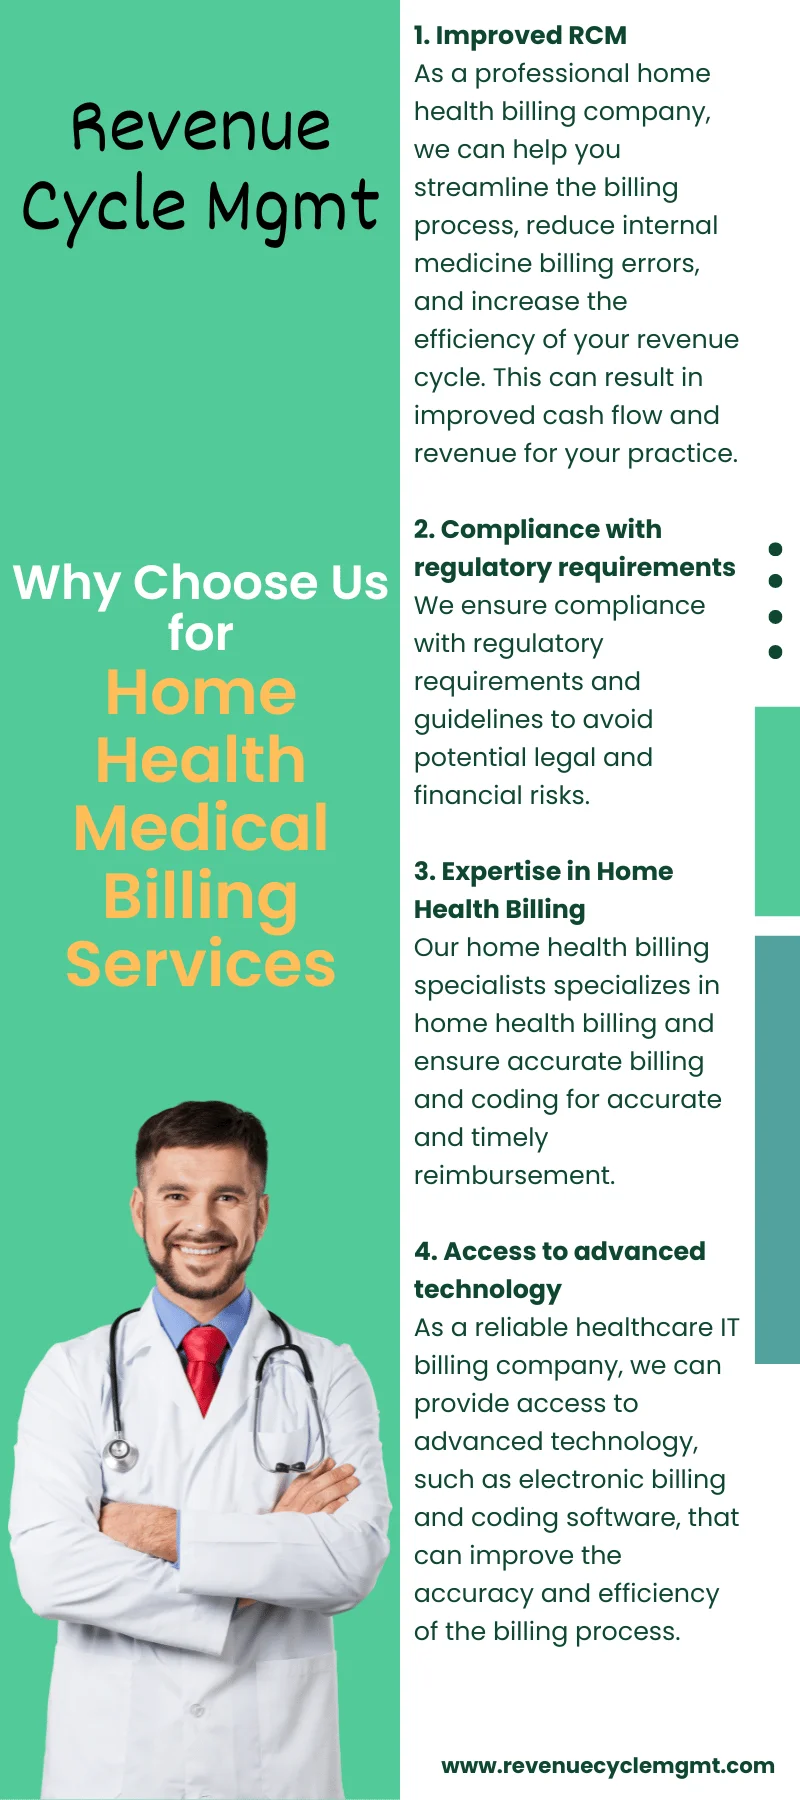 Why Choose Us for Home Health Medical Billing Services